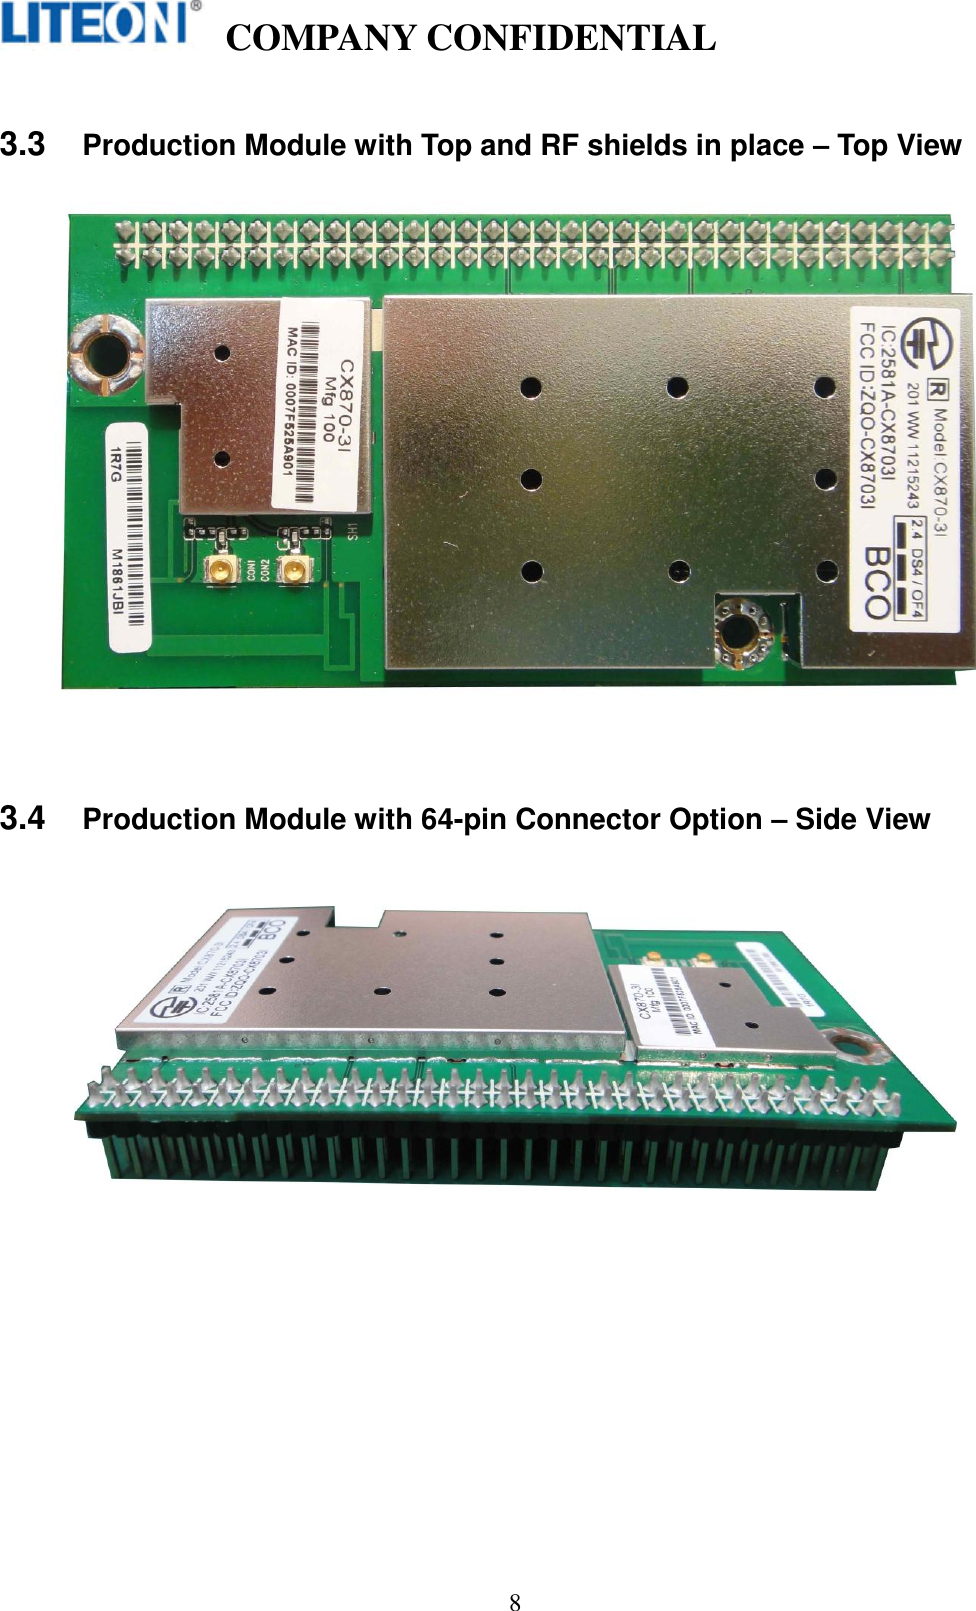   COMPANY CONFIDENTIAL    8  3.3 Production Module with Top and RF shields in place – Top View      3.4 Production Module with 64-pin Connector Option – Side View   